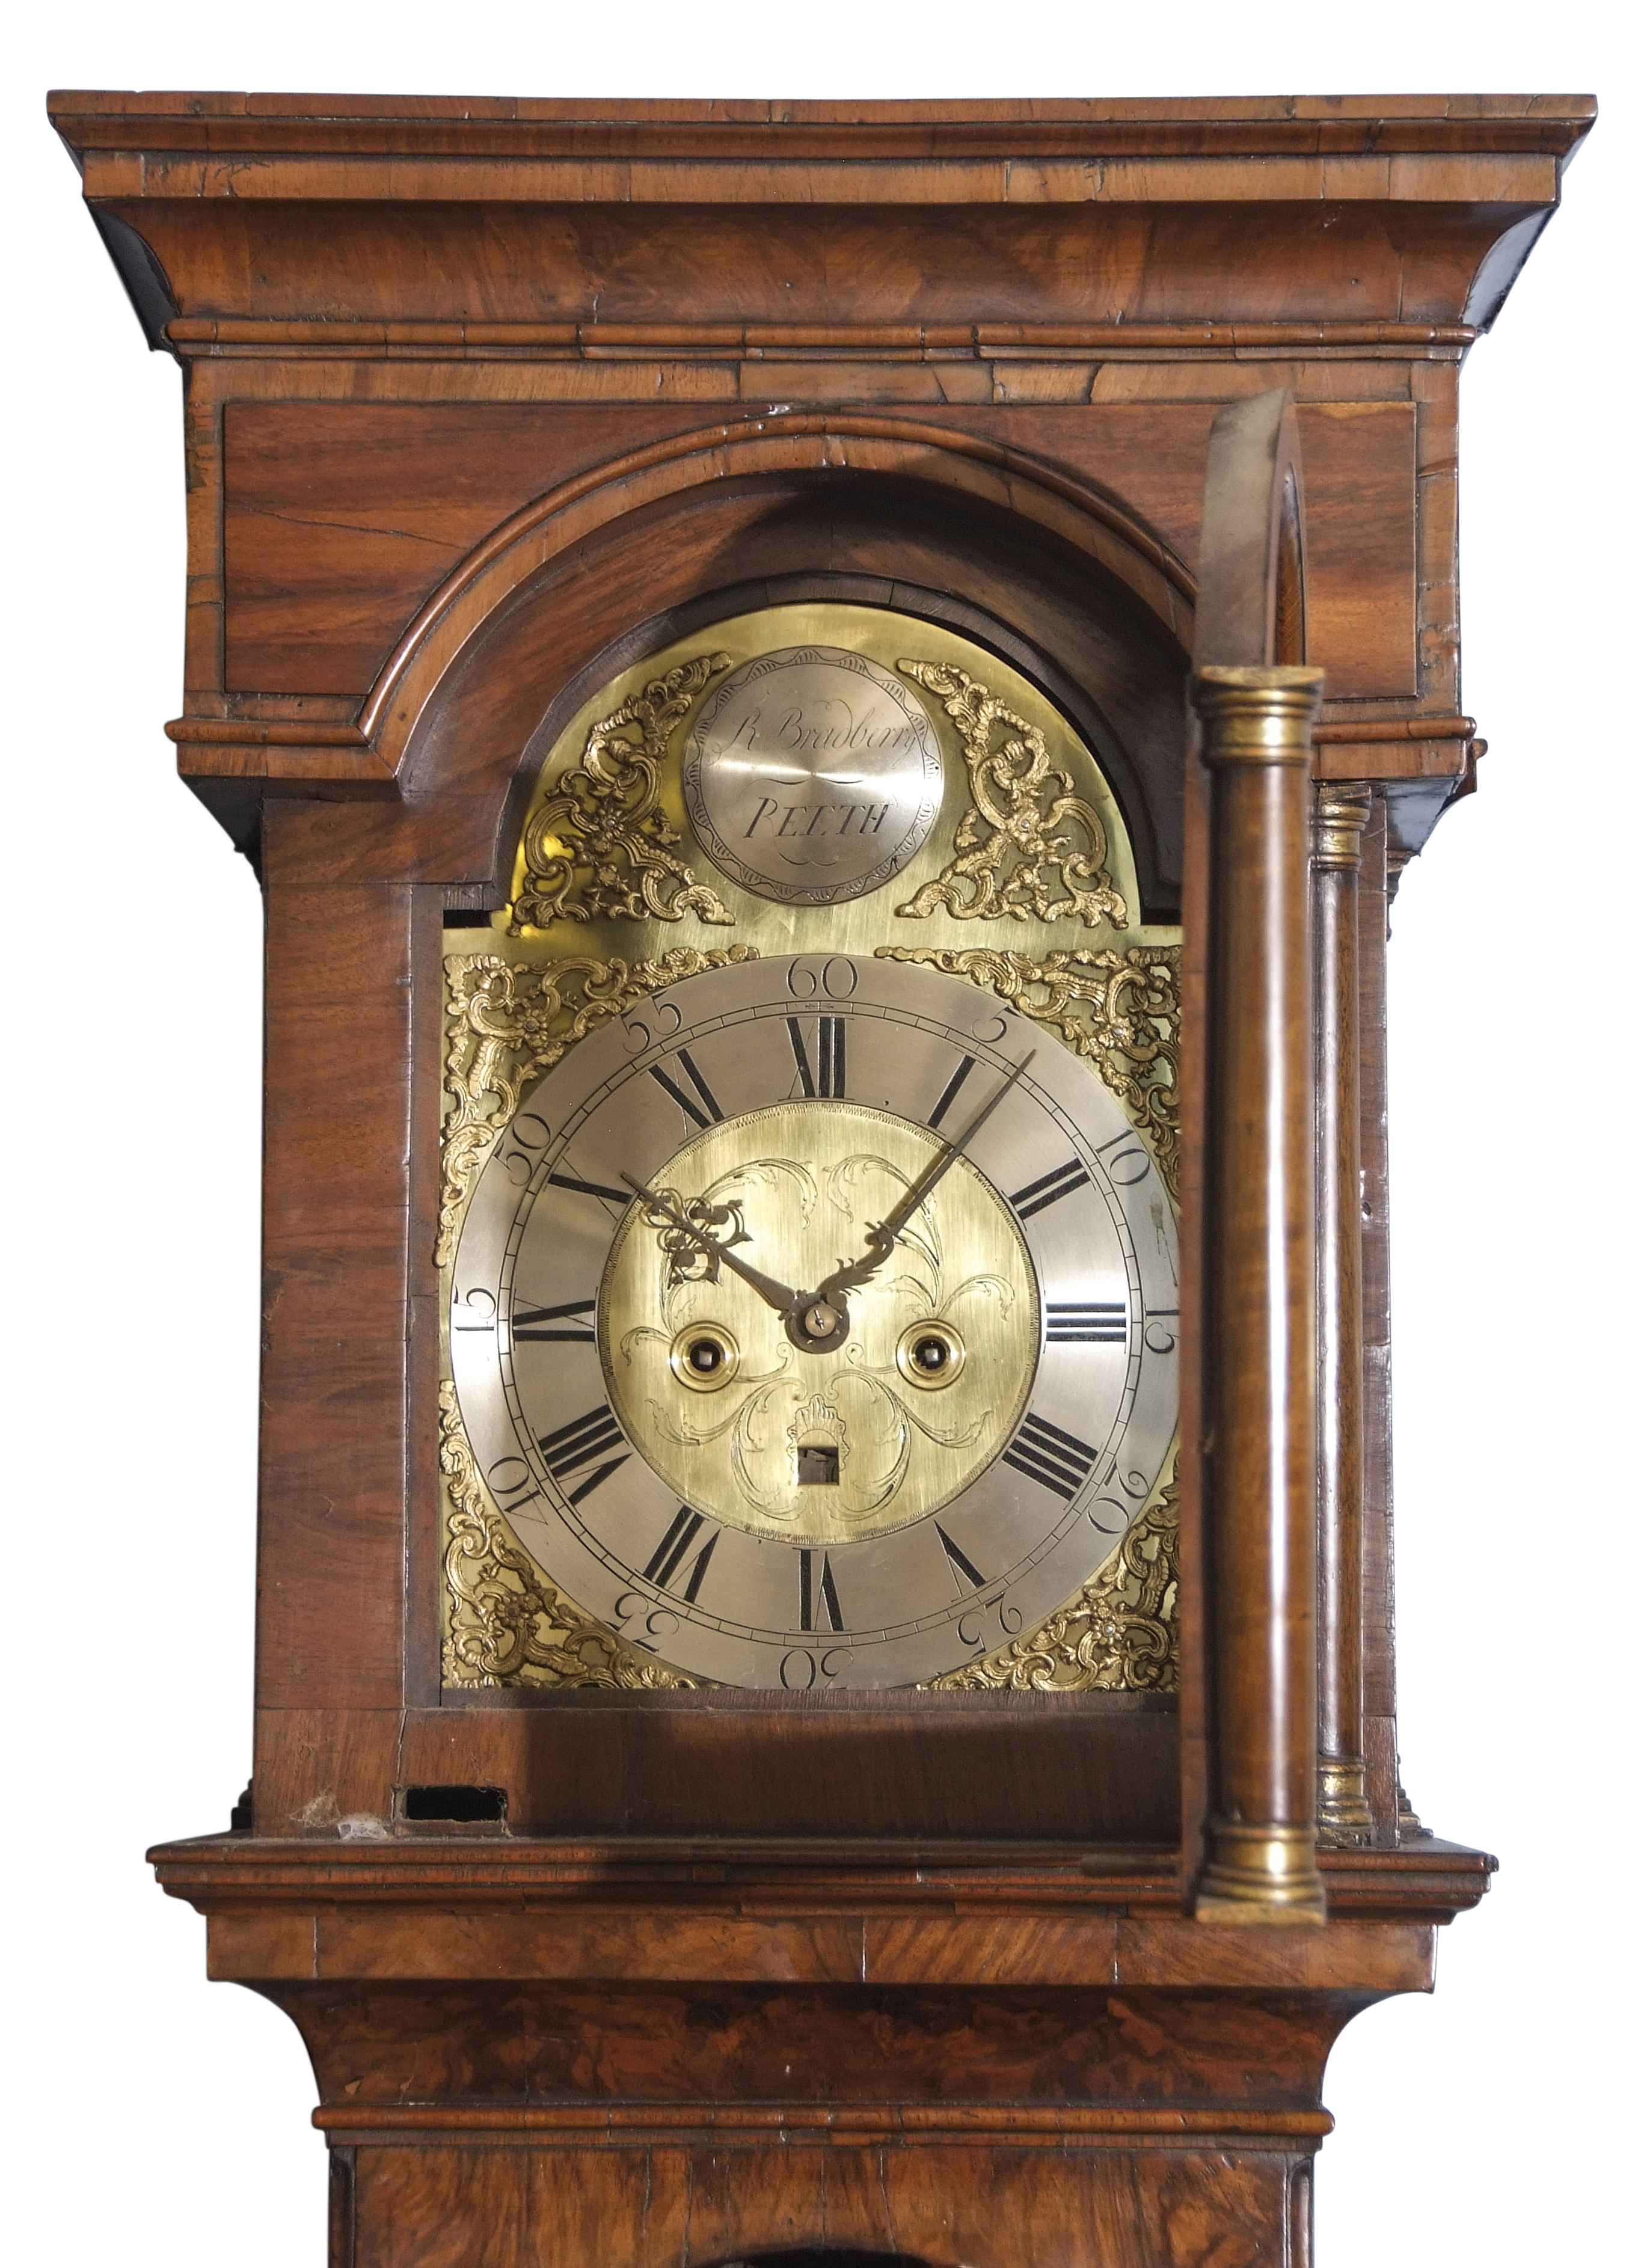 Walnut longcase clock, R Bradberry of Reeth, ogee moulded hood over an arched dial, silvered name - Image 2 of 2